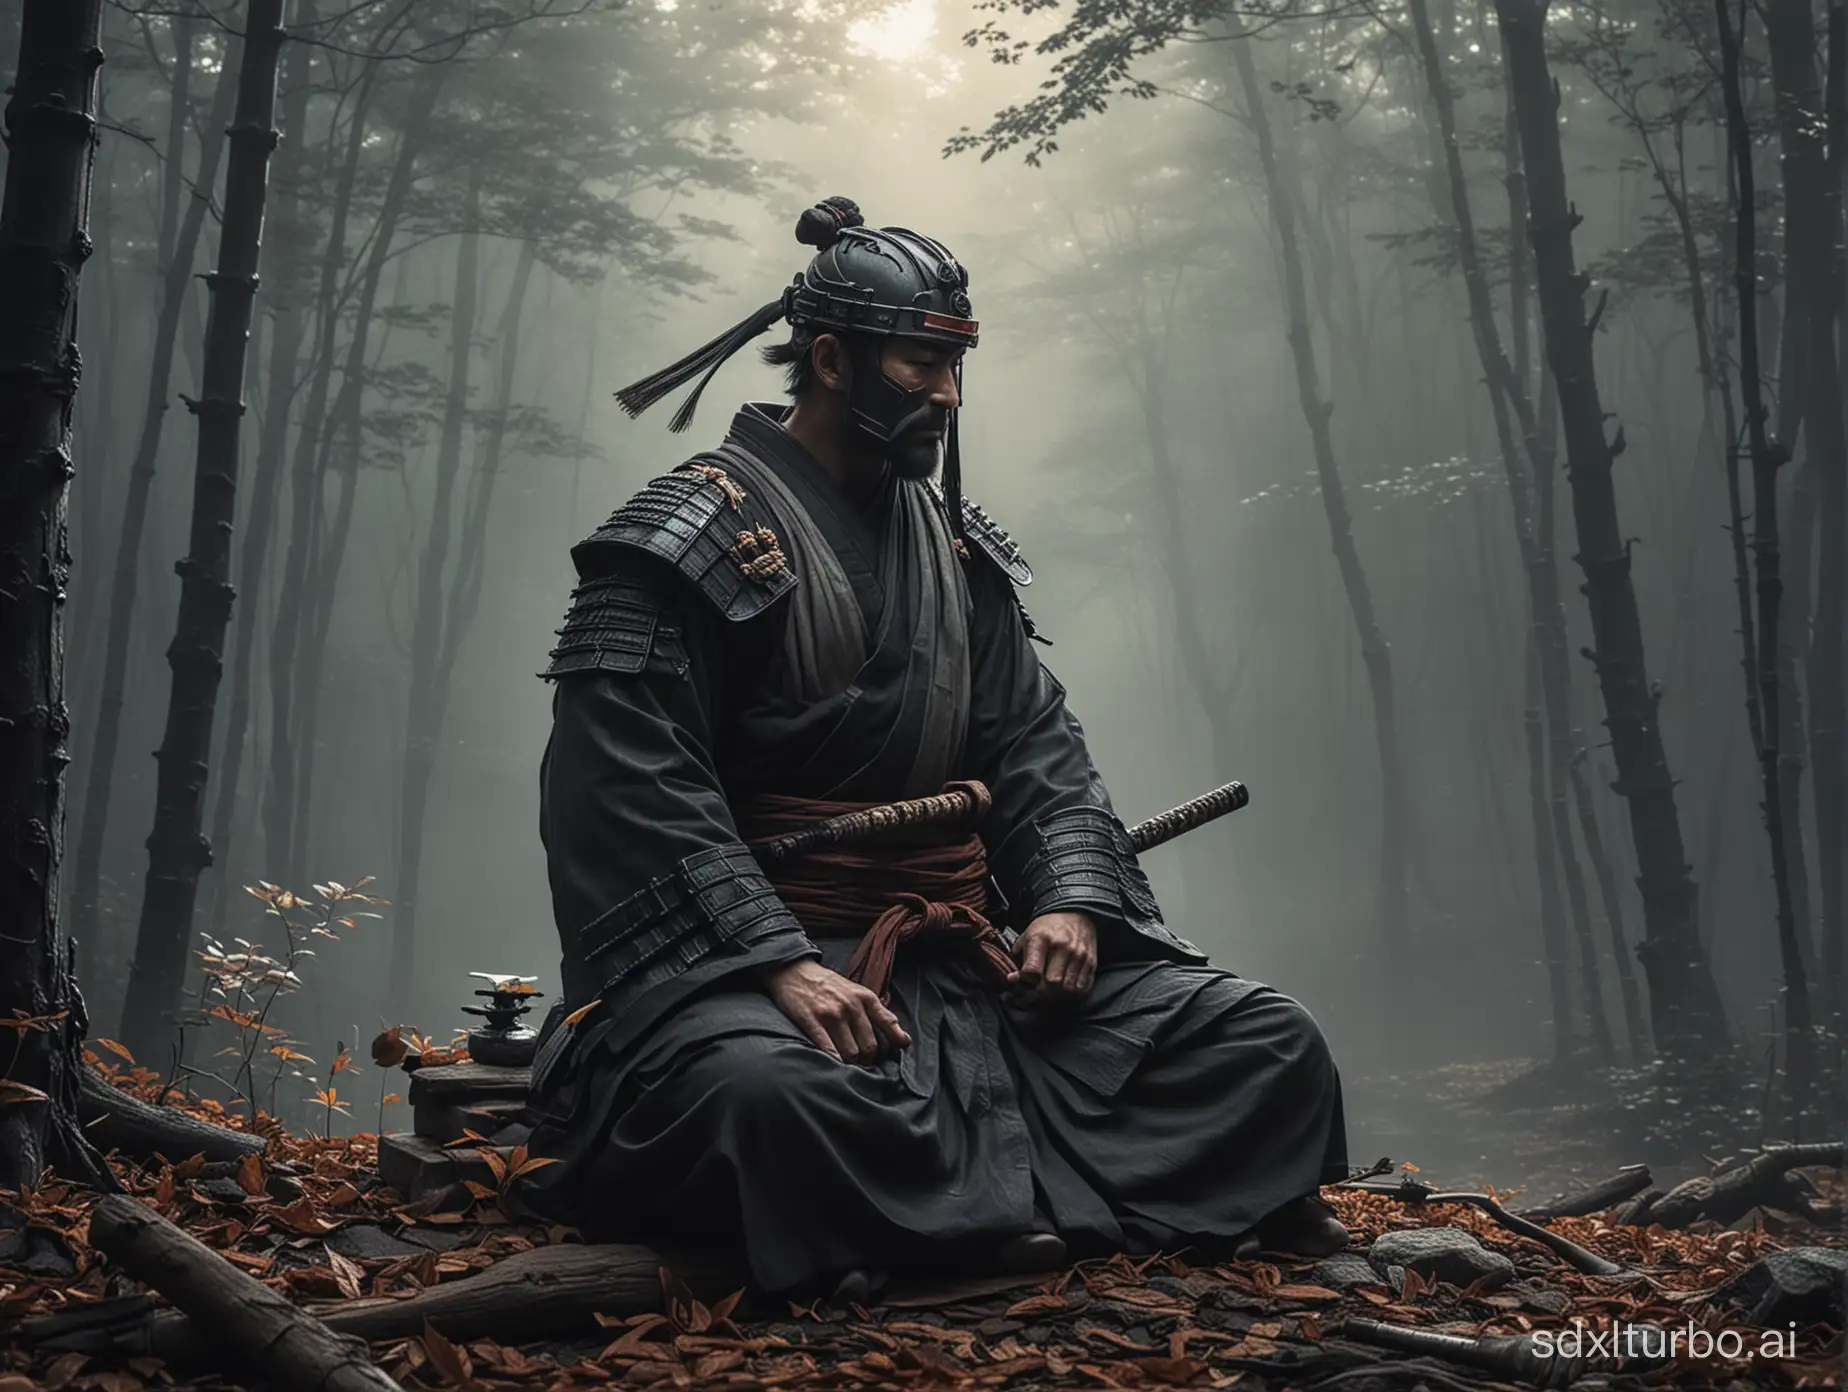 A meditaing ronin